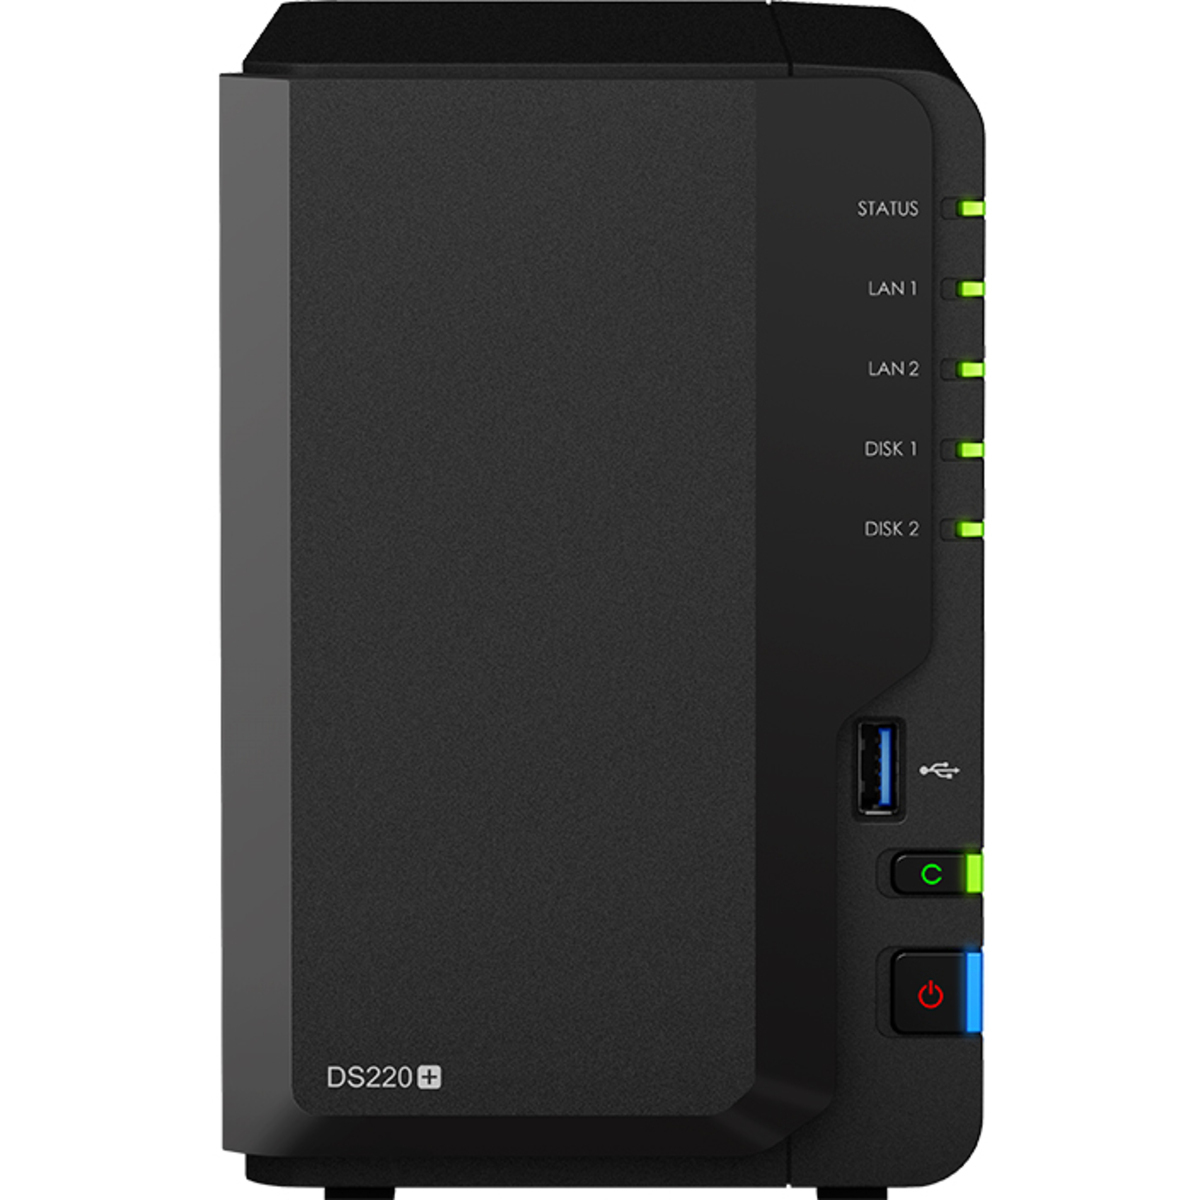 buy $600 Synology DiskStation DS220+ 1tb Desktop NAS - Network Attached Storage Device 2x500gb Samsung 870 EVO MZ-77E500BAM 2.5 SATA 6Gb/s SSD CONSUMER Class Drives Installed - Burn-In Tested - FREE RAM UPGRADE - nas headquarters buy network attached storage server device das new raid-5 free shipping usa christmas new year holiday sale DiskStation DS220+